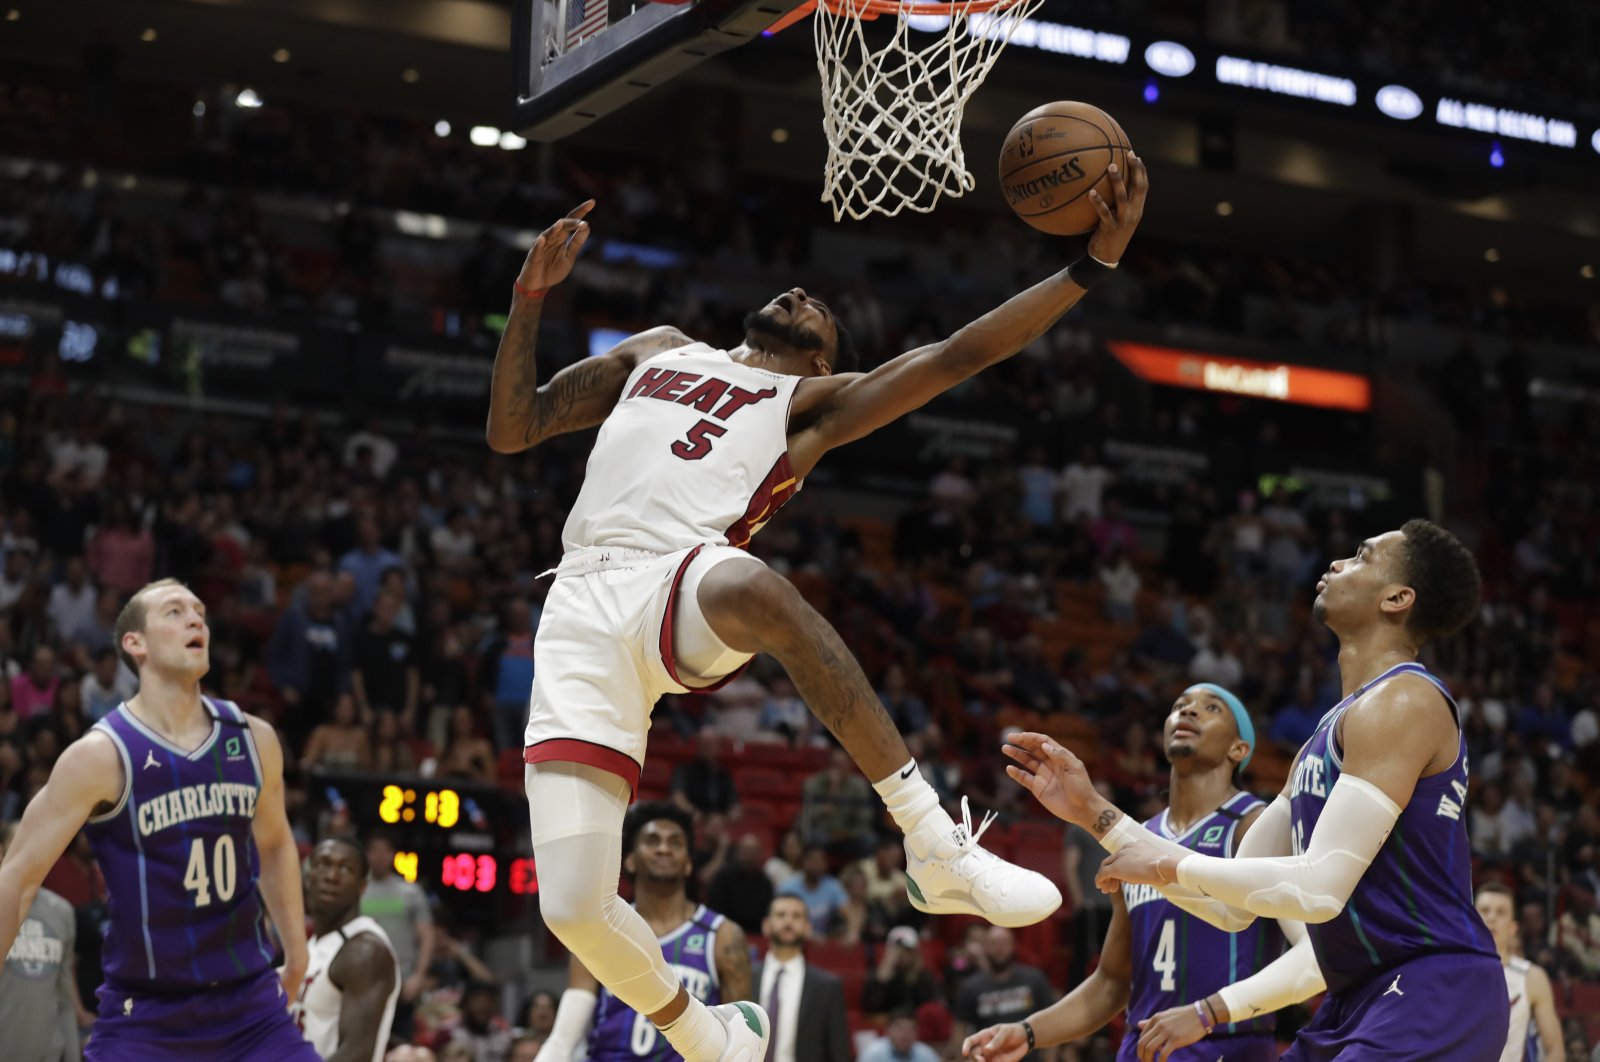 Miami Heat forward Derrick Jones Jr. (5) goes up for a shot during the second half of an NBA basketball game against the Charlotte Hornets, in Miami, March 11, 2020. (AP Photo)